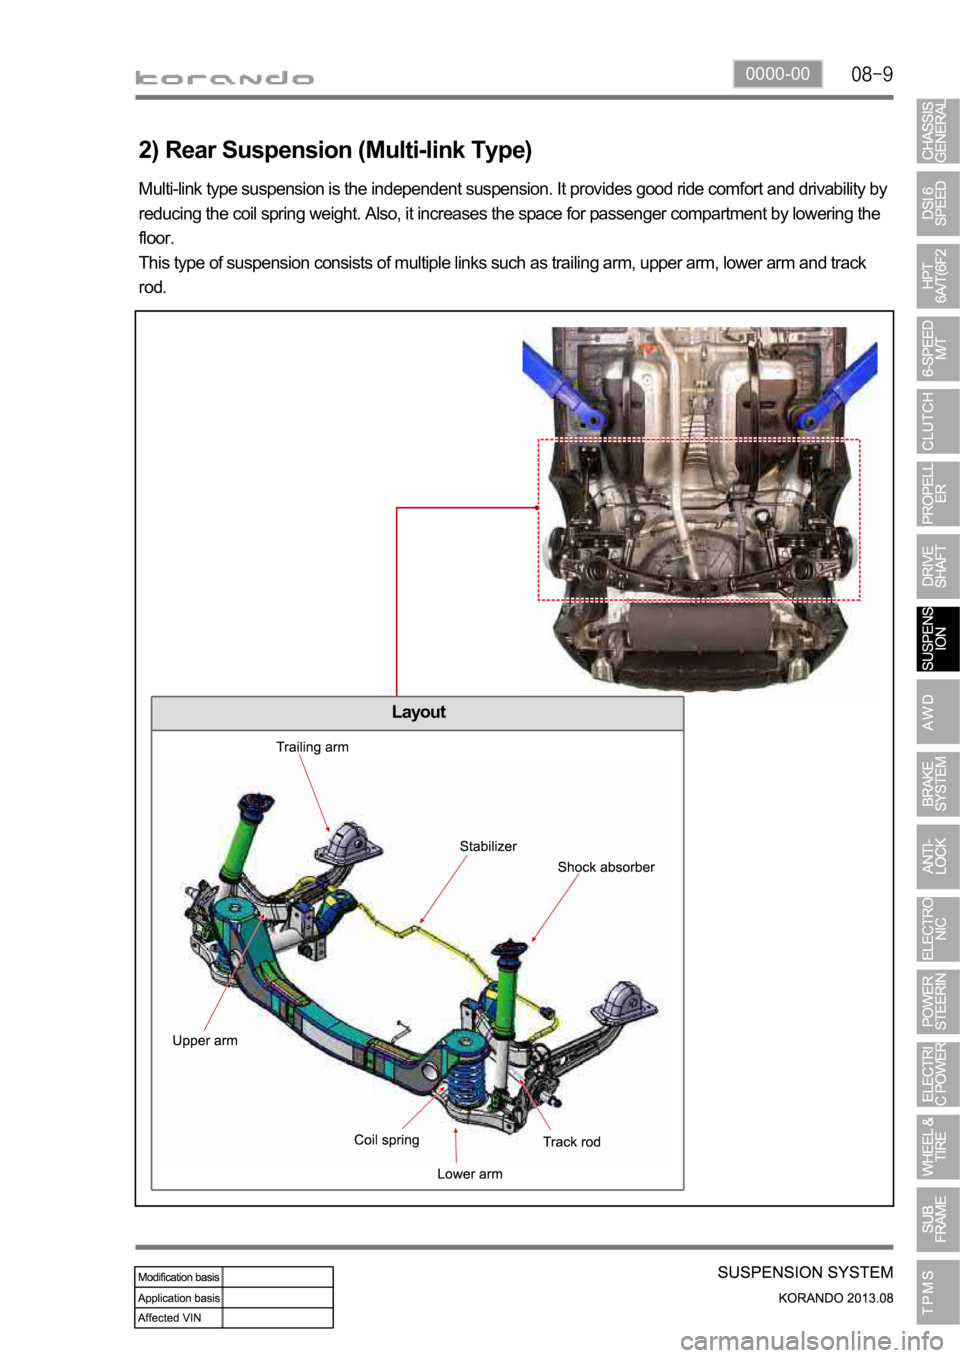 SSANGYONG KORANDO 2013 User Guide 0000-00
2) Rear Suspension (Multi-link Type)
Multi-link type suspension is the independent suspension. It provides good ride comfort and drivability by 
reducing the coil spring weight. Also, it incre